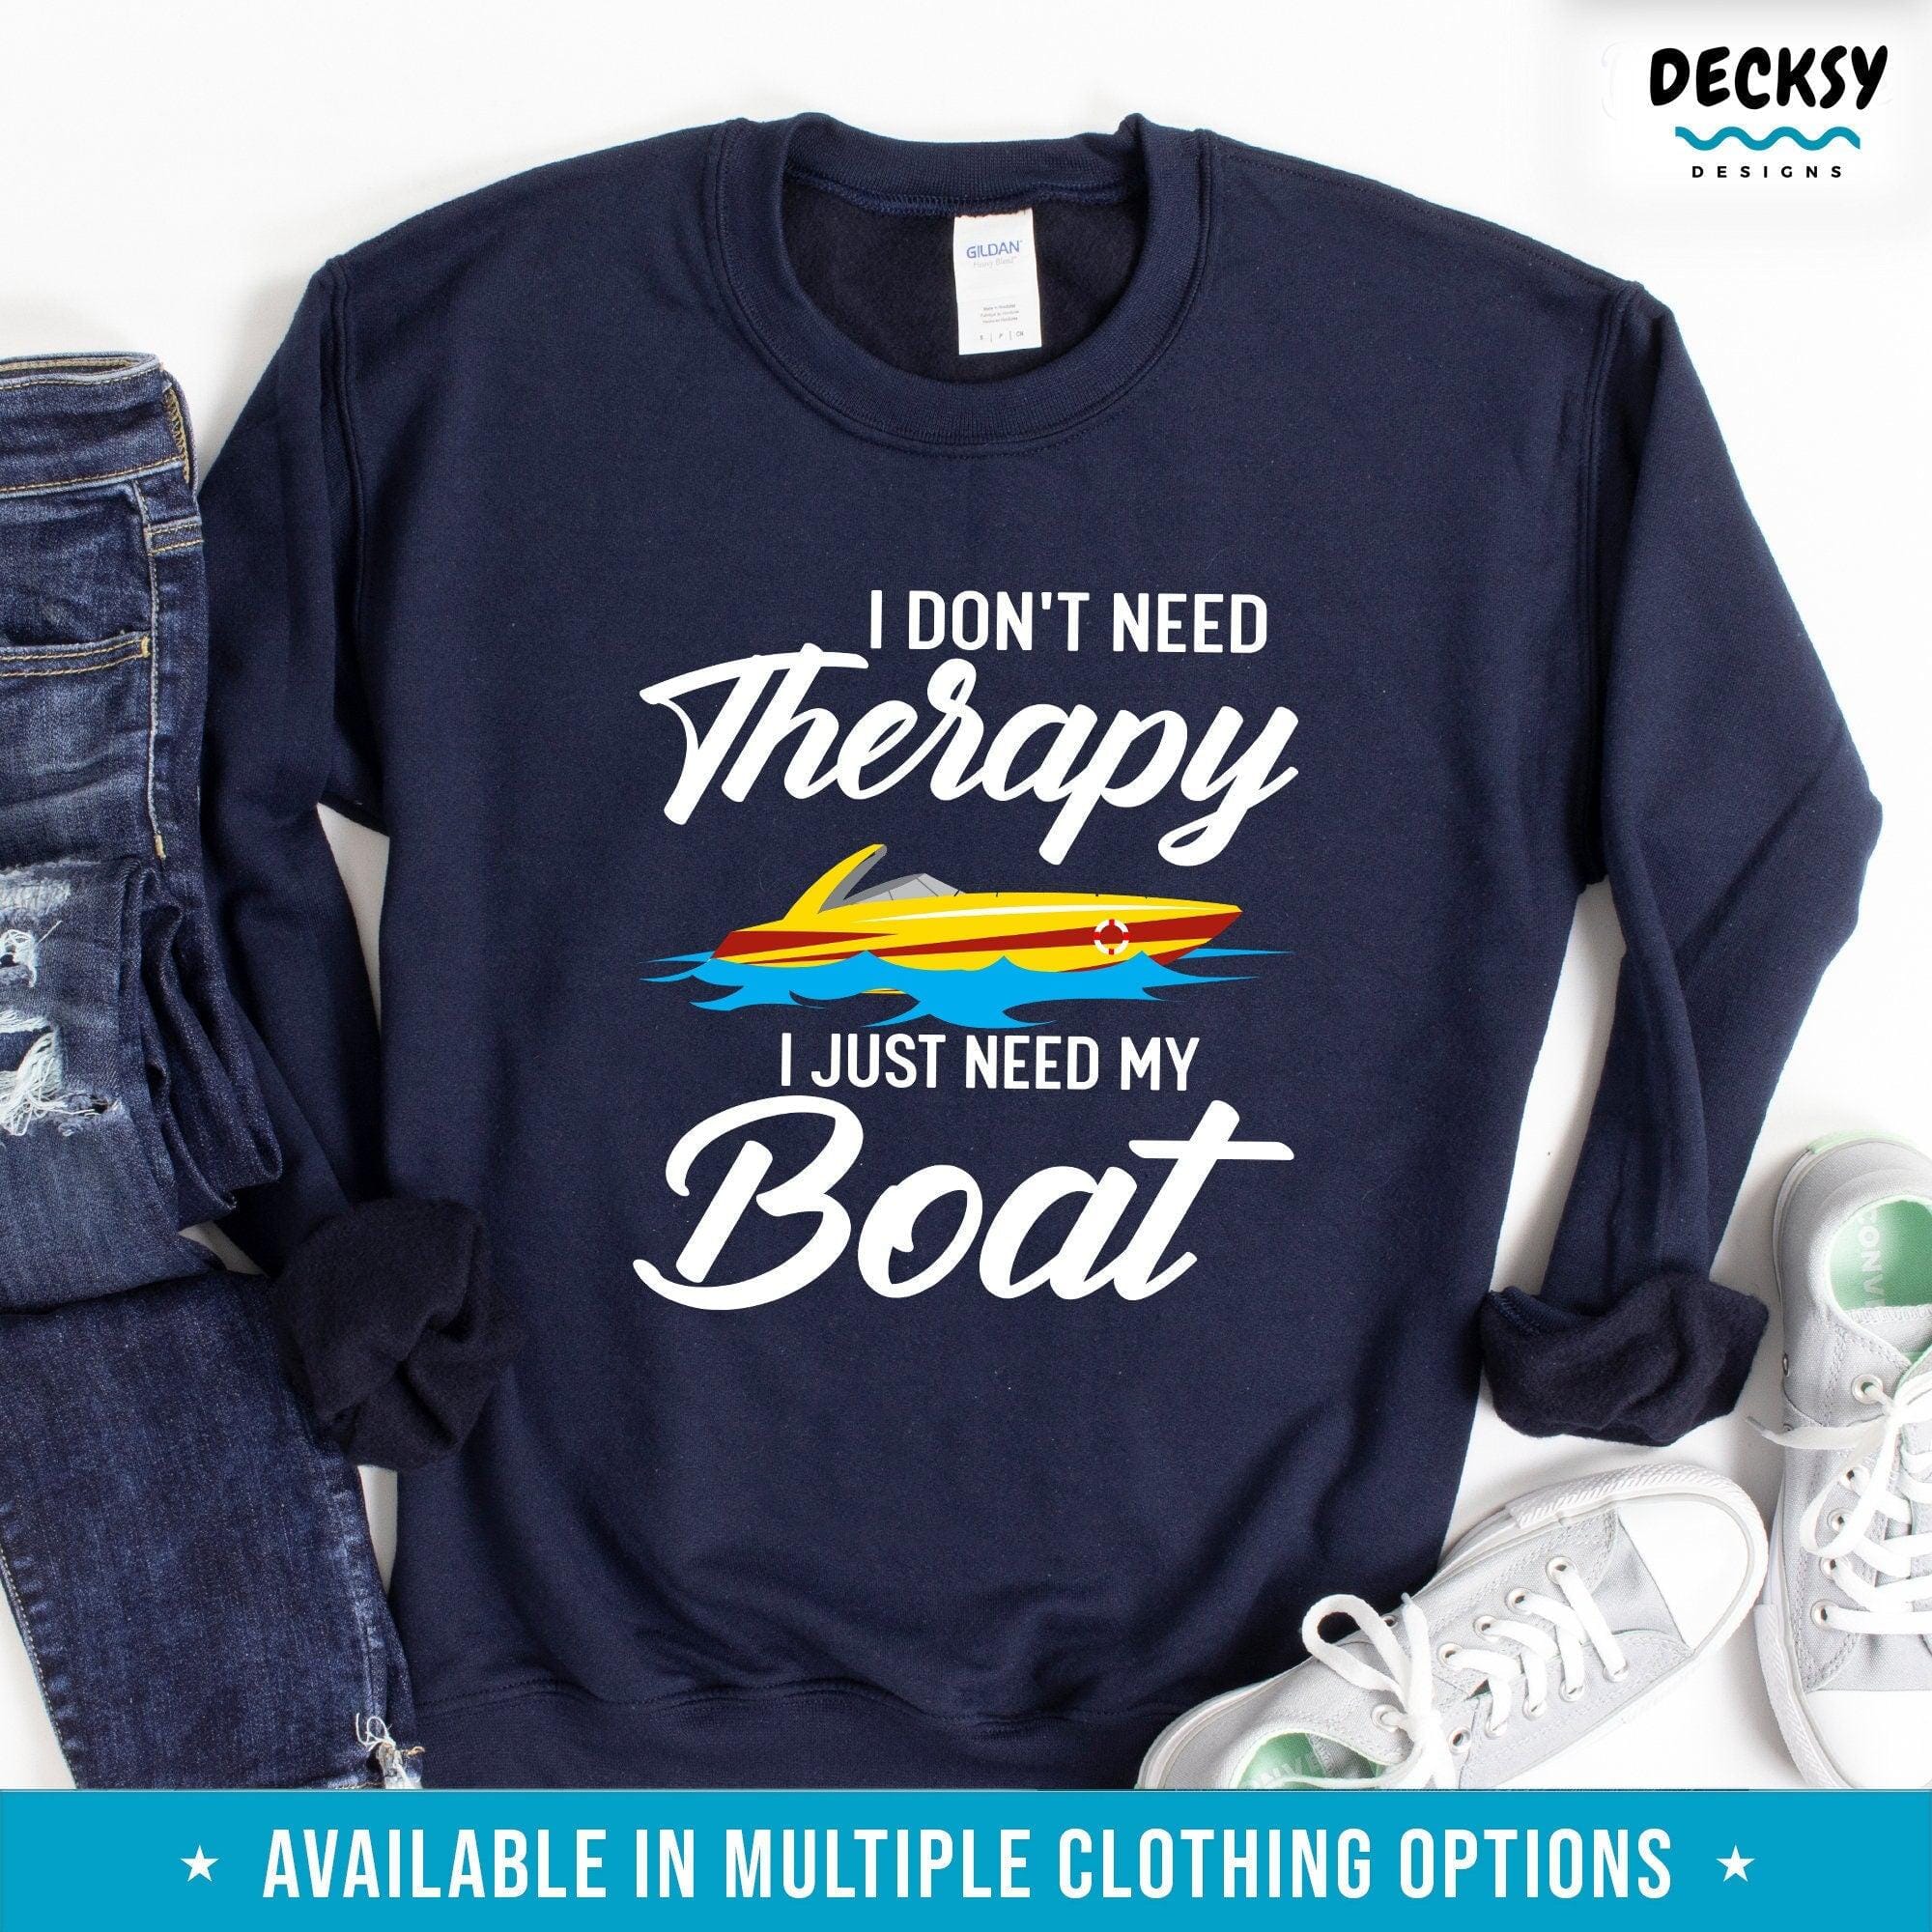 Boat Lover Shirt, Boating Gift-Clothing:Gender-Neutral Adult Clothing:Tops & Tees:T-shirts:Graphic Tees-DecksyDesigns